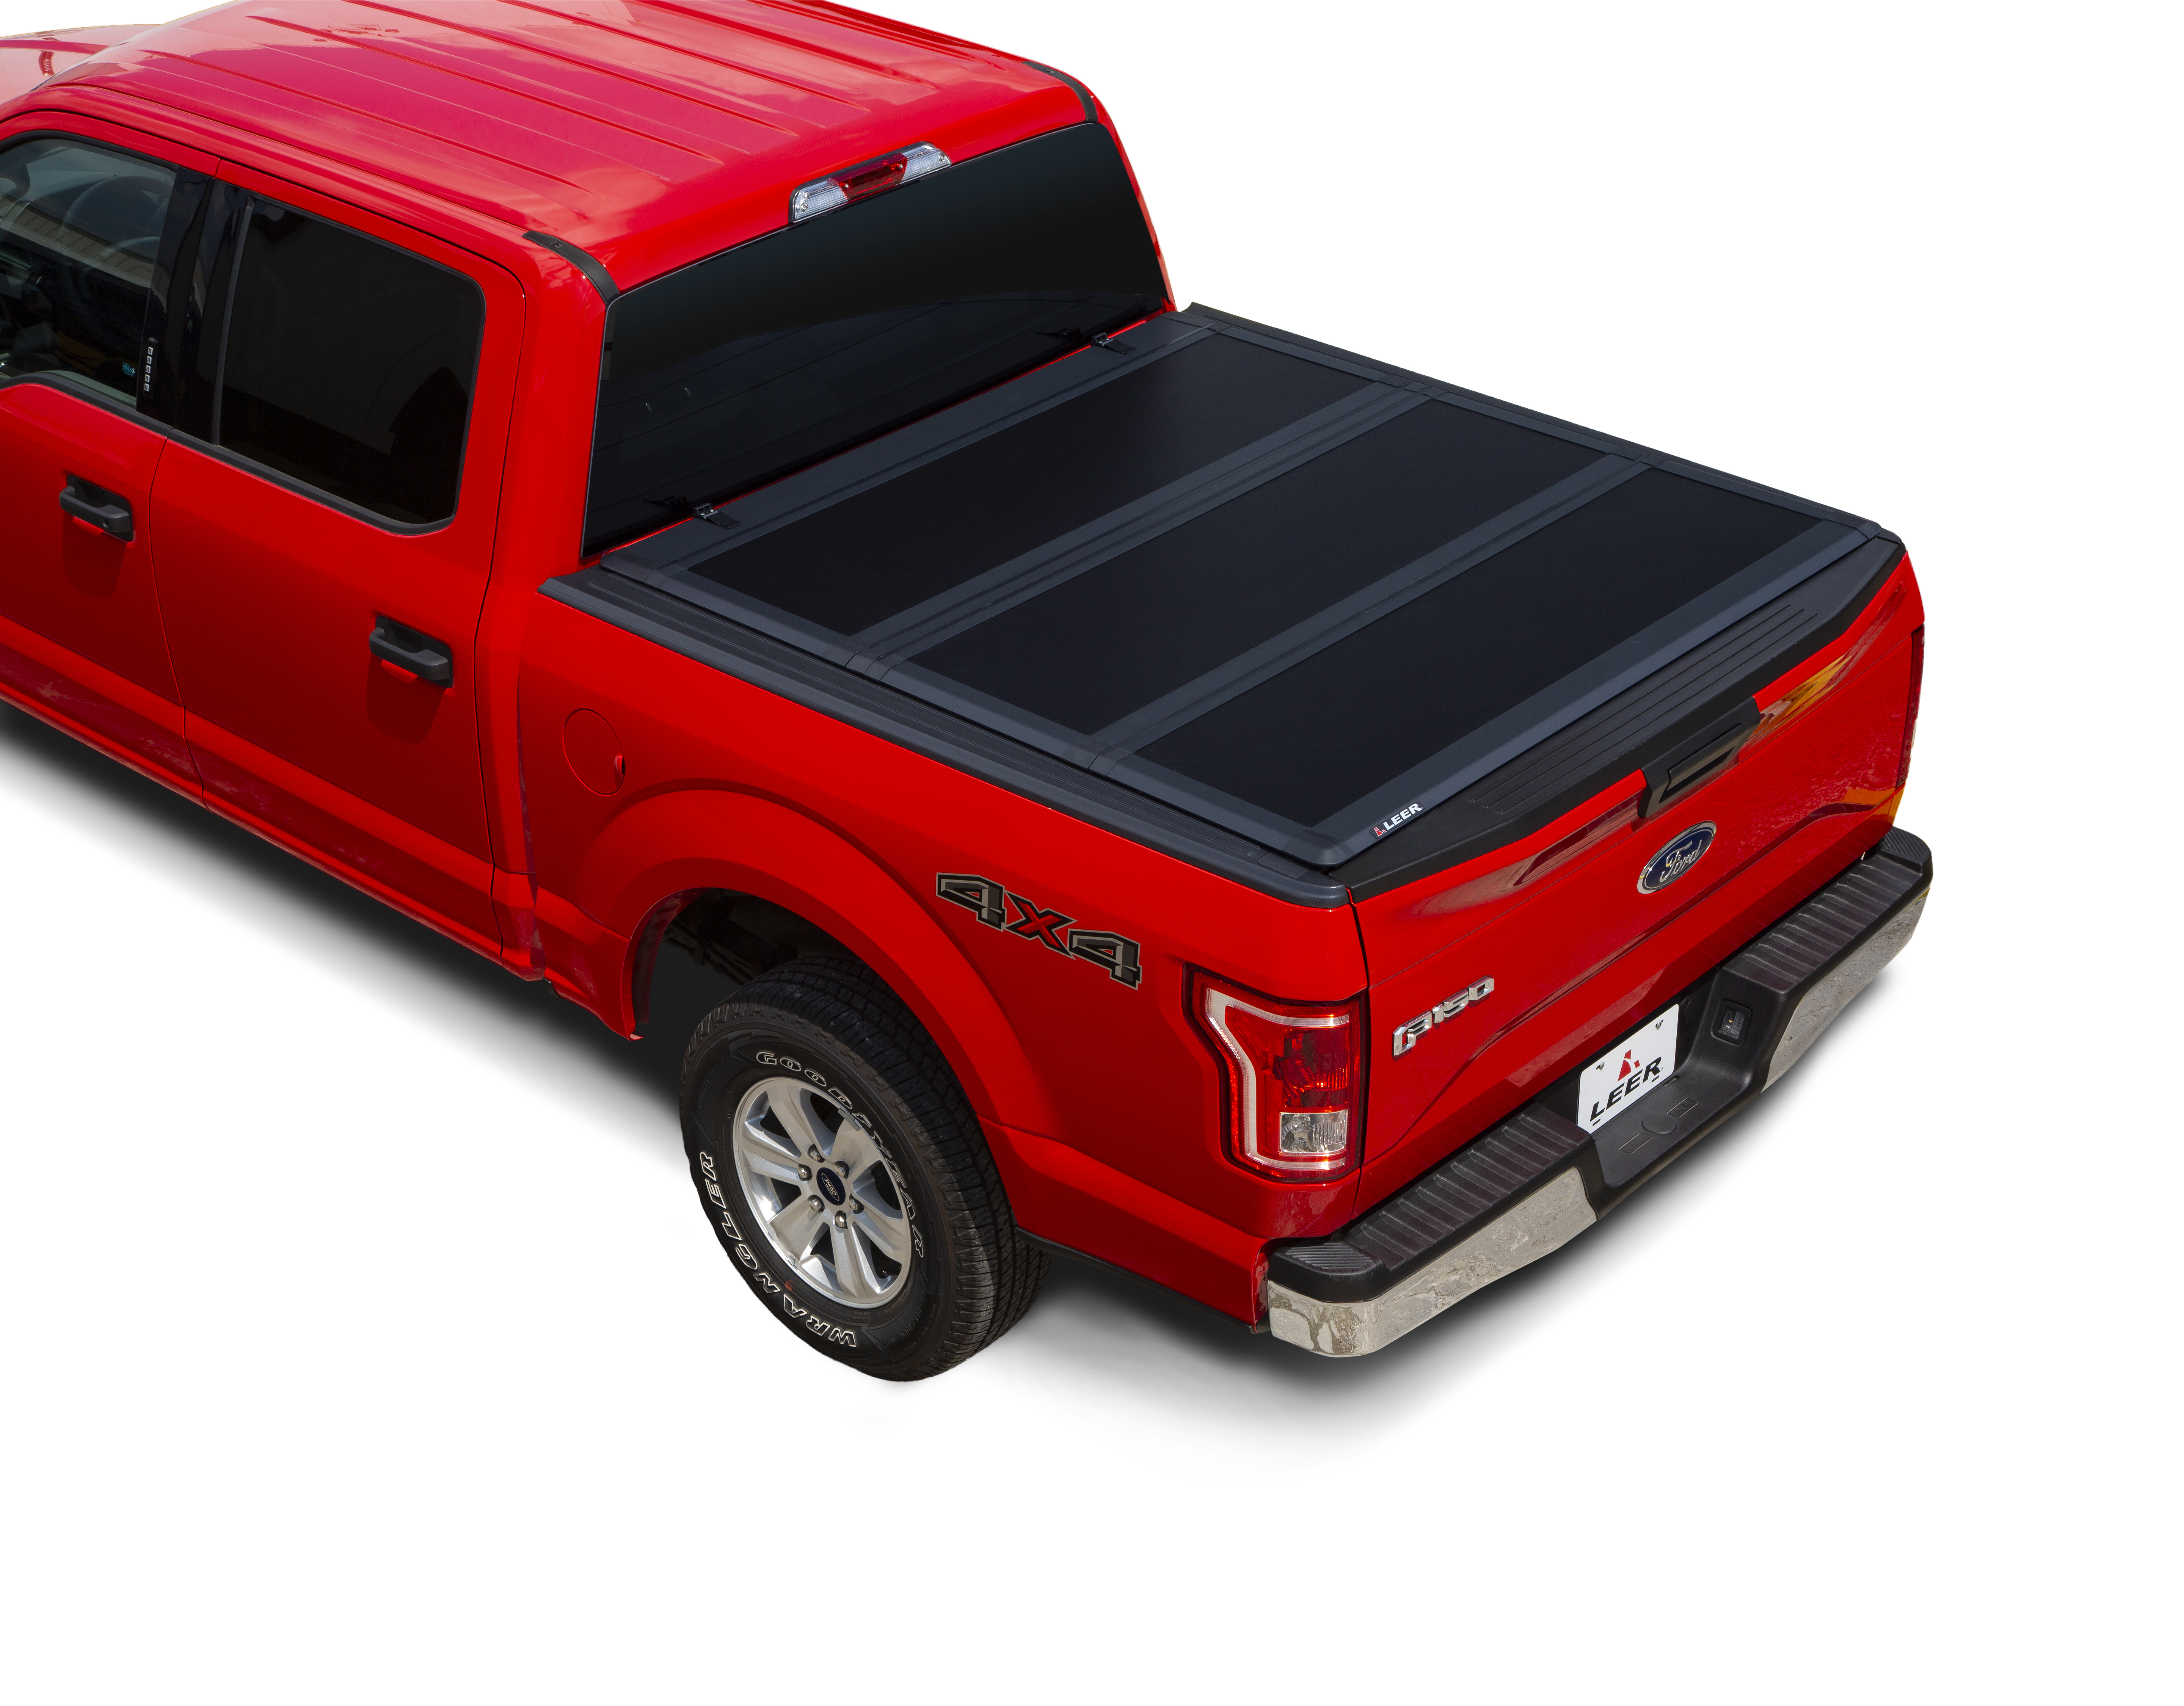 LEER HF350M   Fits 2004+ Ford F-150 with 5.6 FT Bed   Low-Profile, Easy On/Off, Hard Tri-Fold Truck Bed Tonneau Cover